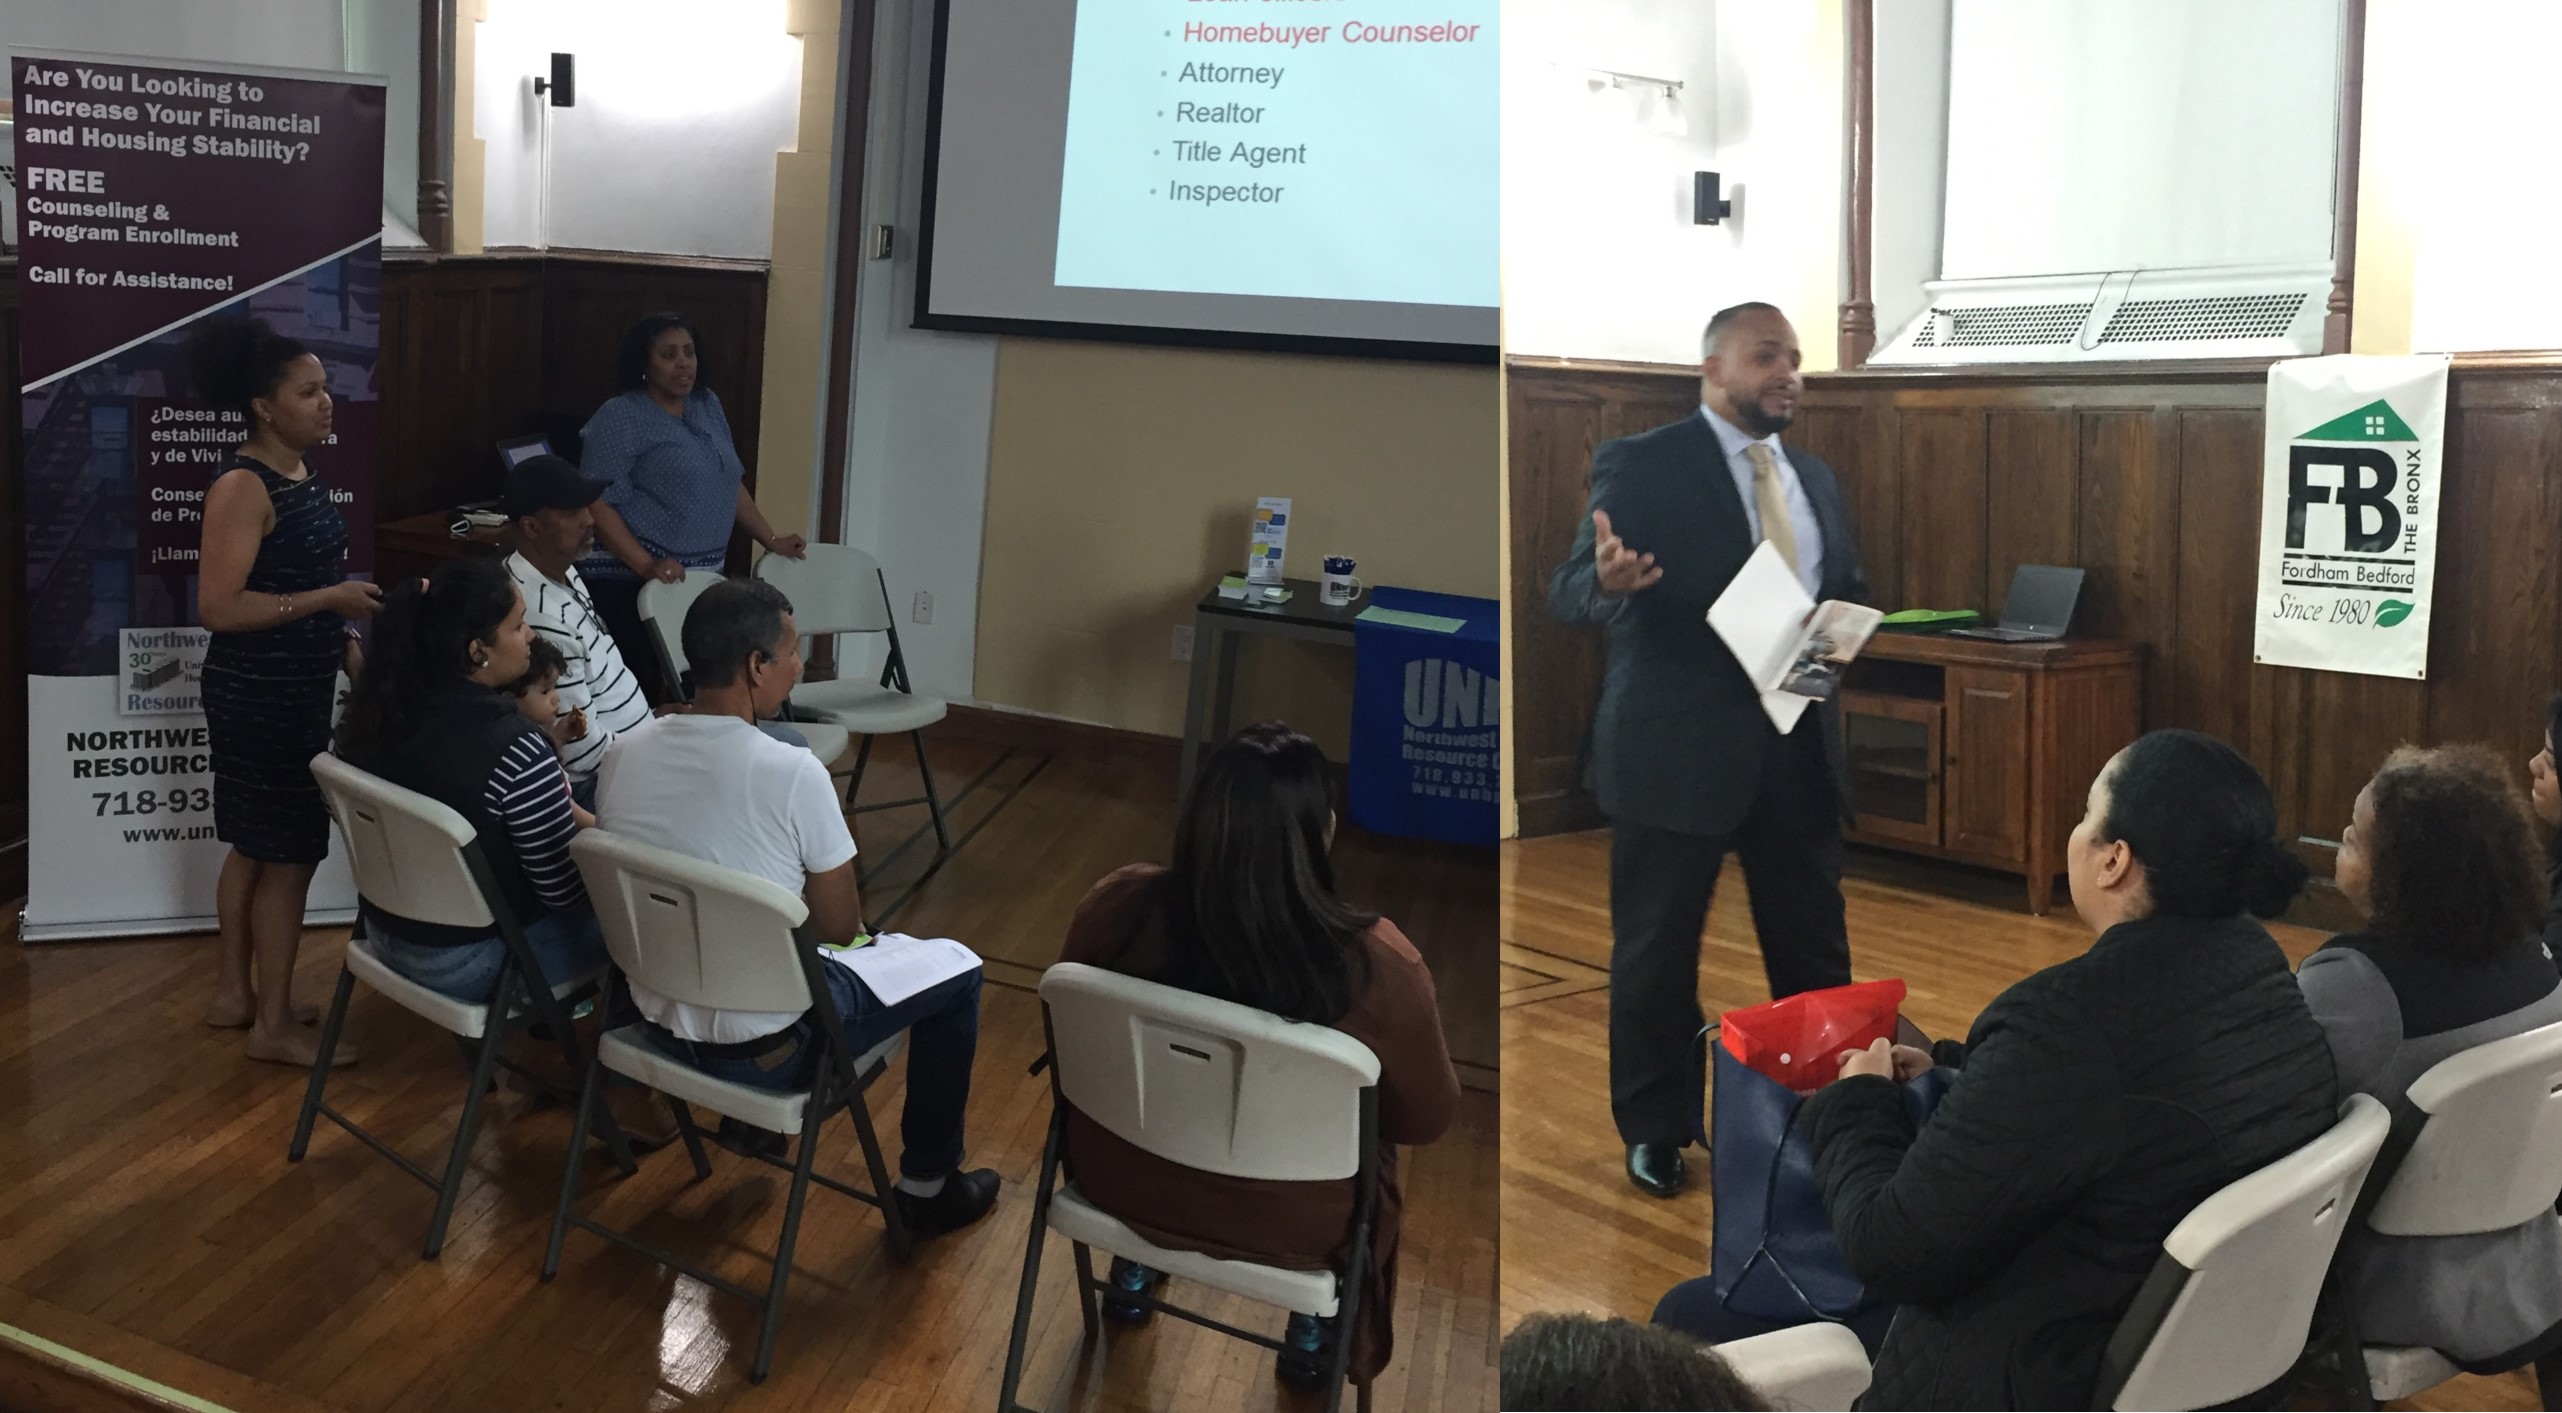 Two presentations were offered at the event, one in Spanish and one in English. The presentation offered an overview of home-buying basics. Jumelia from UNHP, each bank and NHS participated in the presentation.